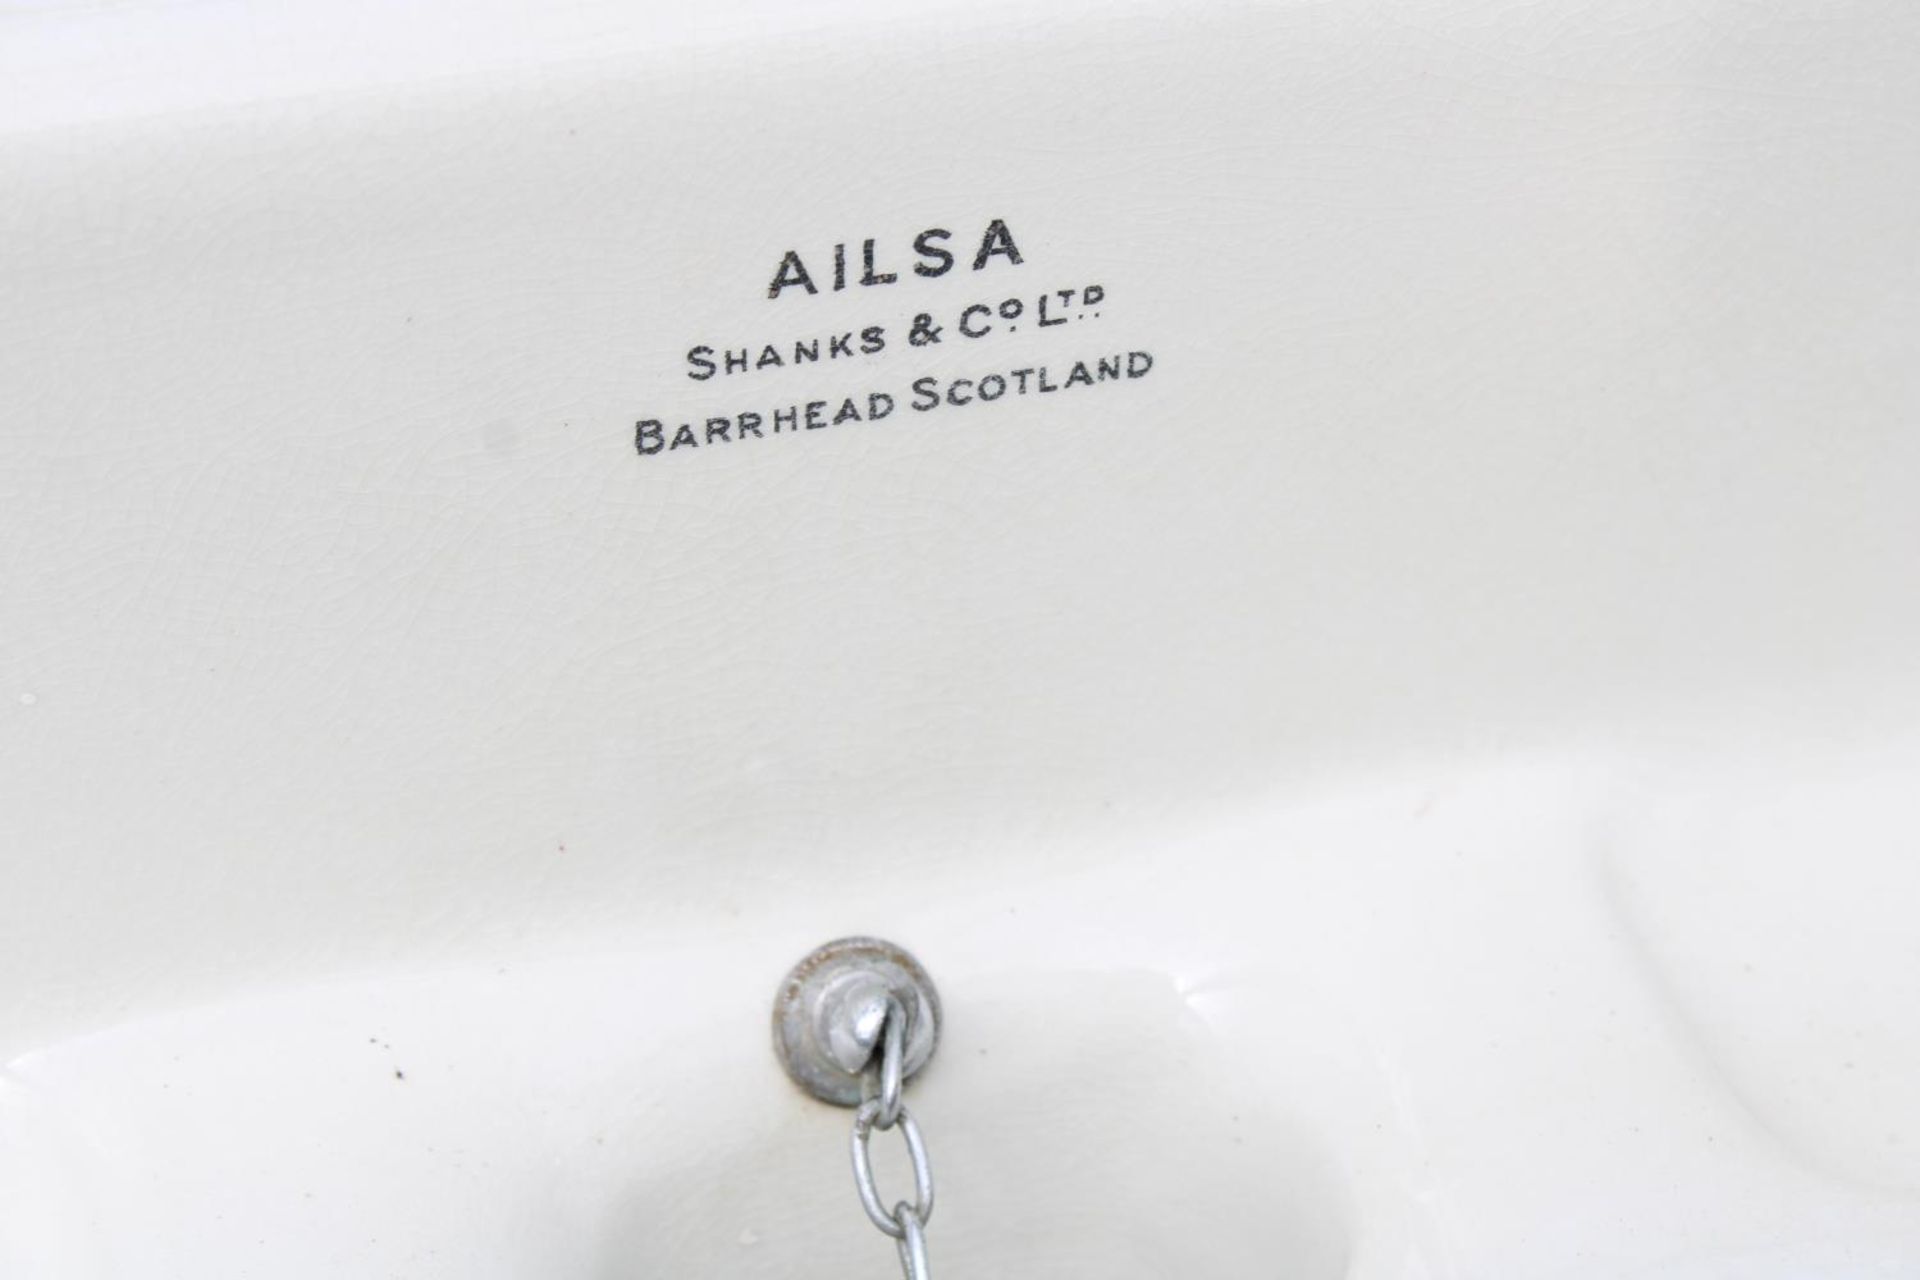 A WHITE AILSA SHANKS & CO LTD SINK WITH BARLEY TWIST WOODEN STAND - Image 3 of 4